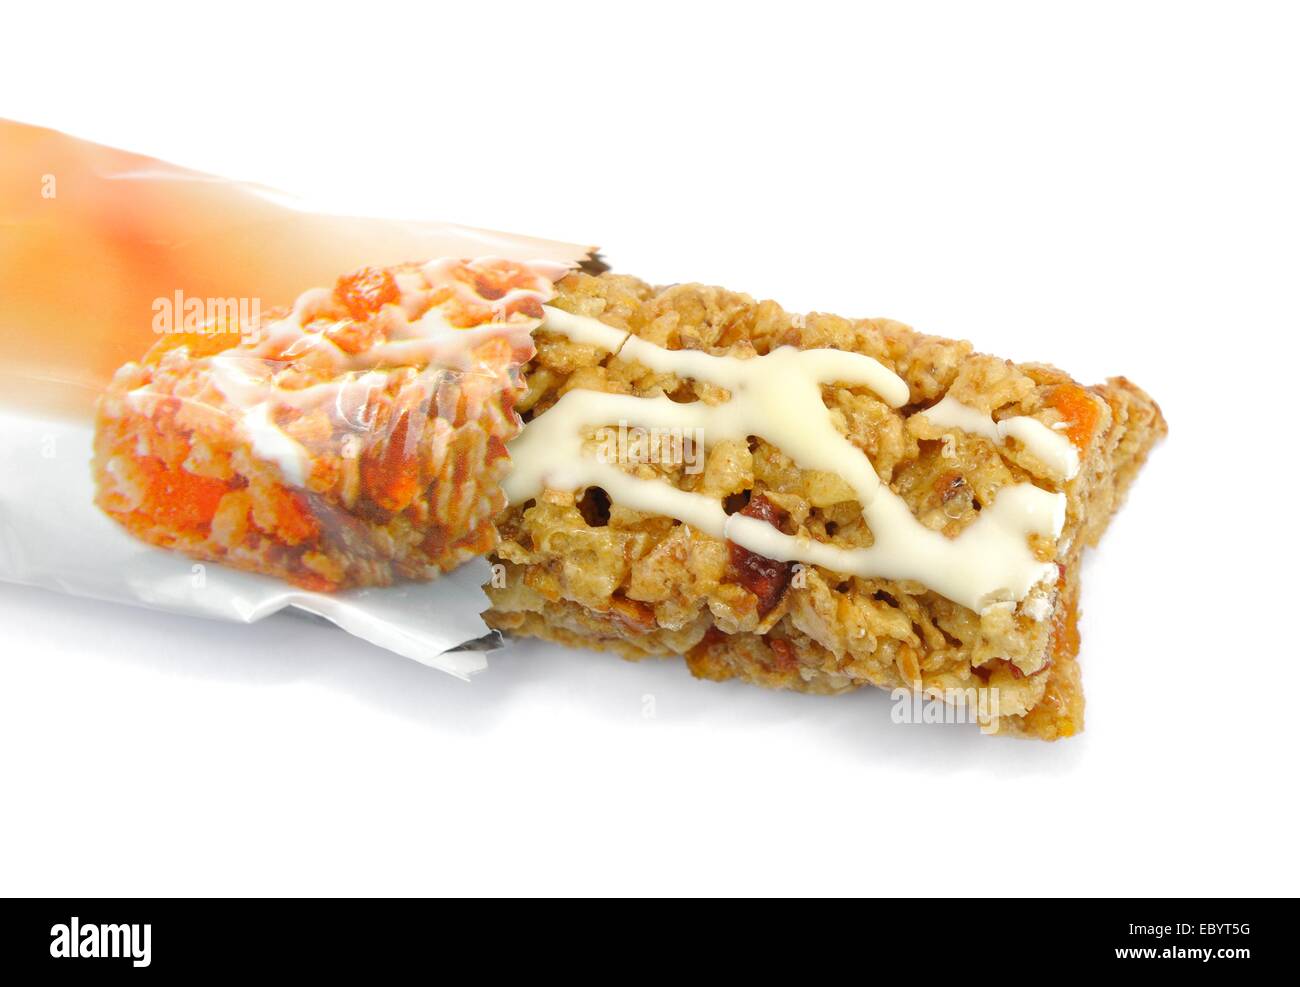 Special k peach and apricot cereal bar Stock Photo